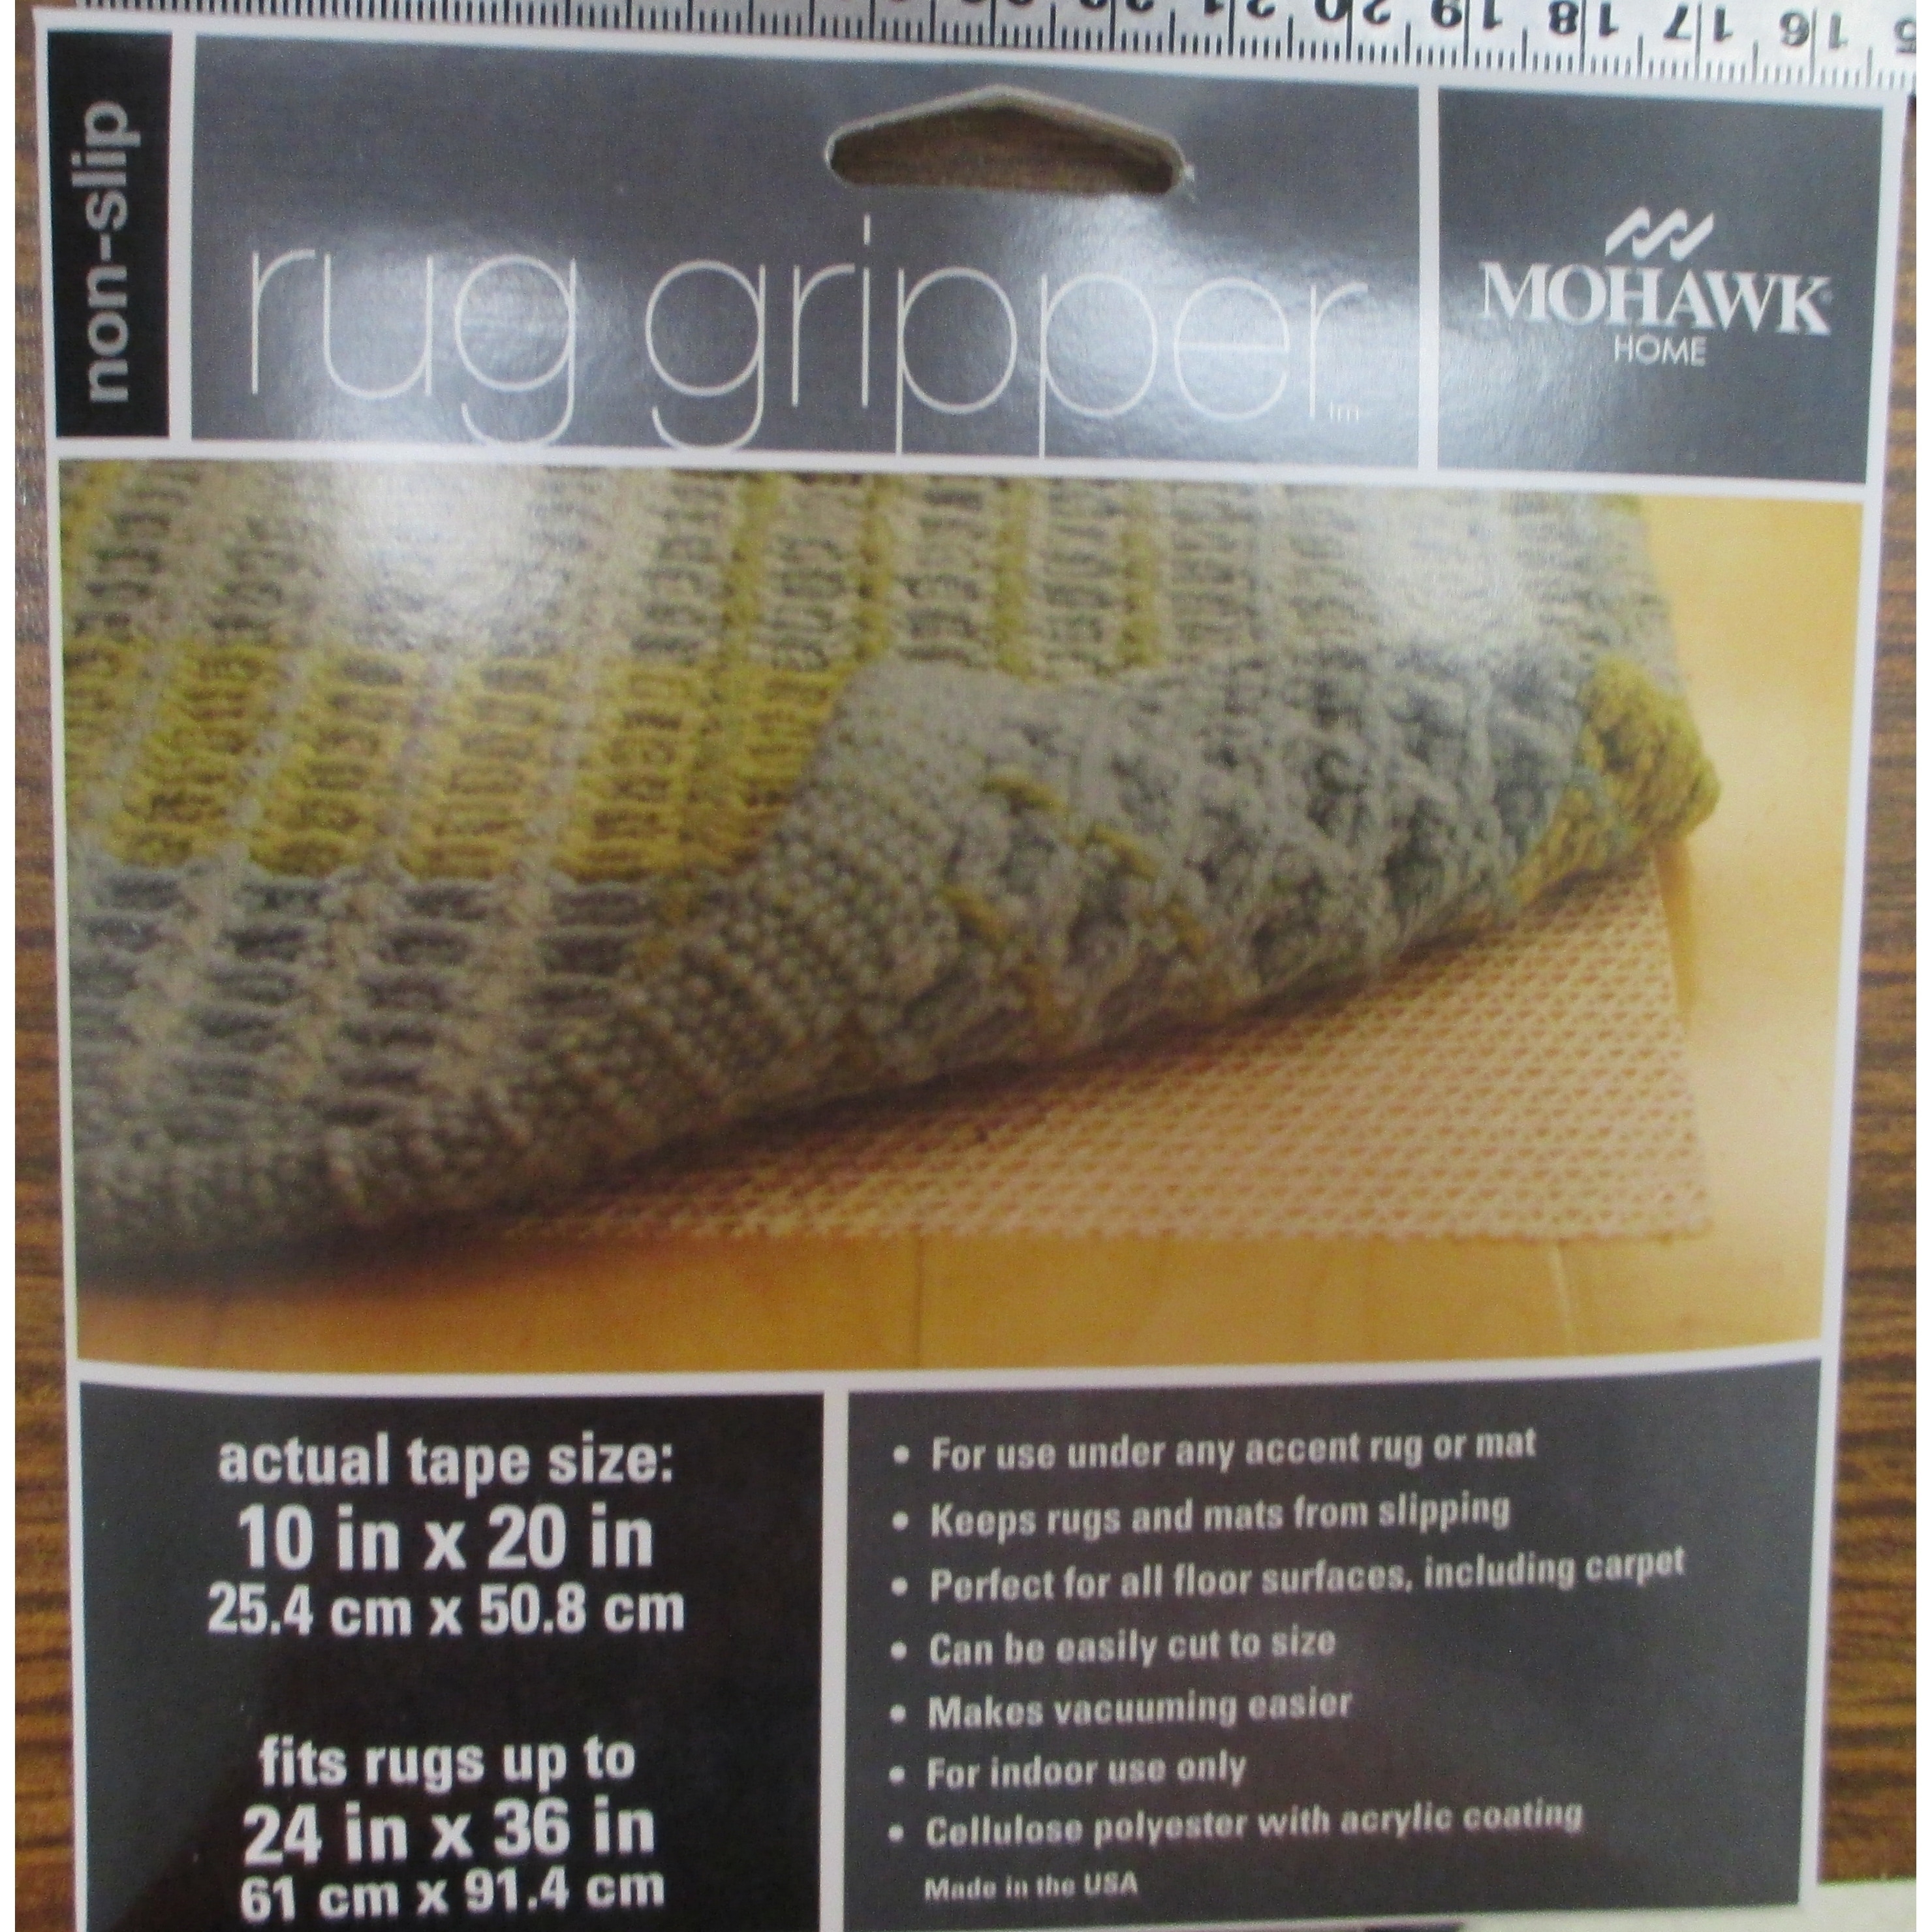 Lok Lift Rug Gripper Anti-Slip Rug Tape, 10-Inches by 20-Inches